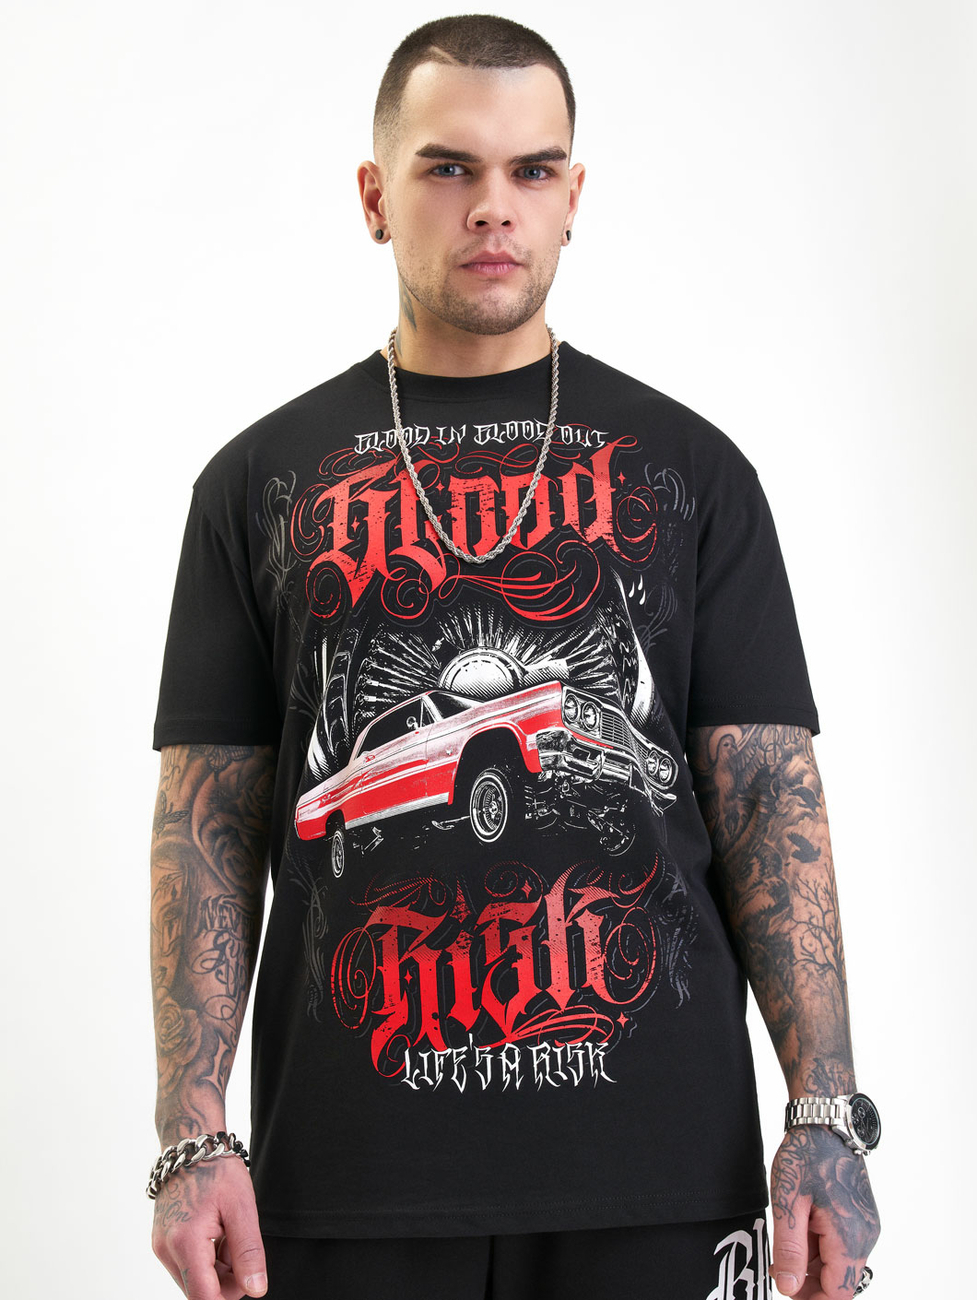 Blood In Blood Out Tavos T-Shirt XL